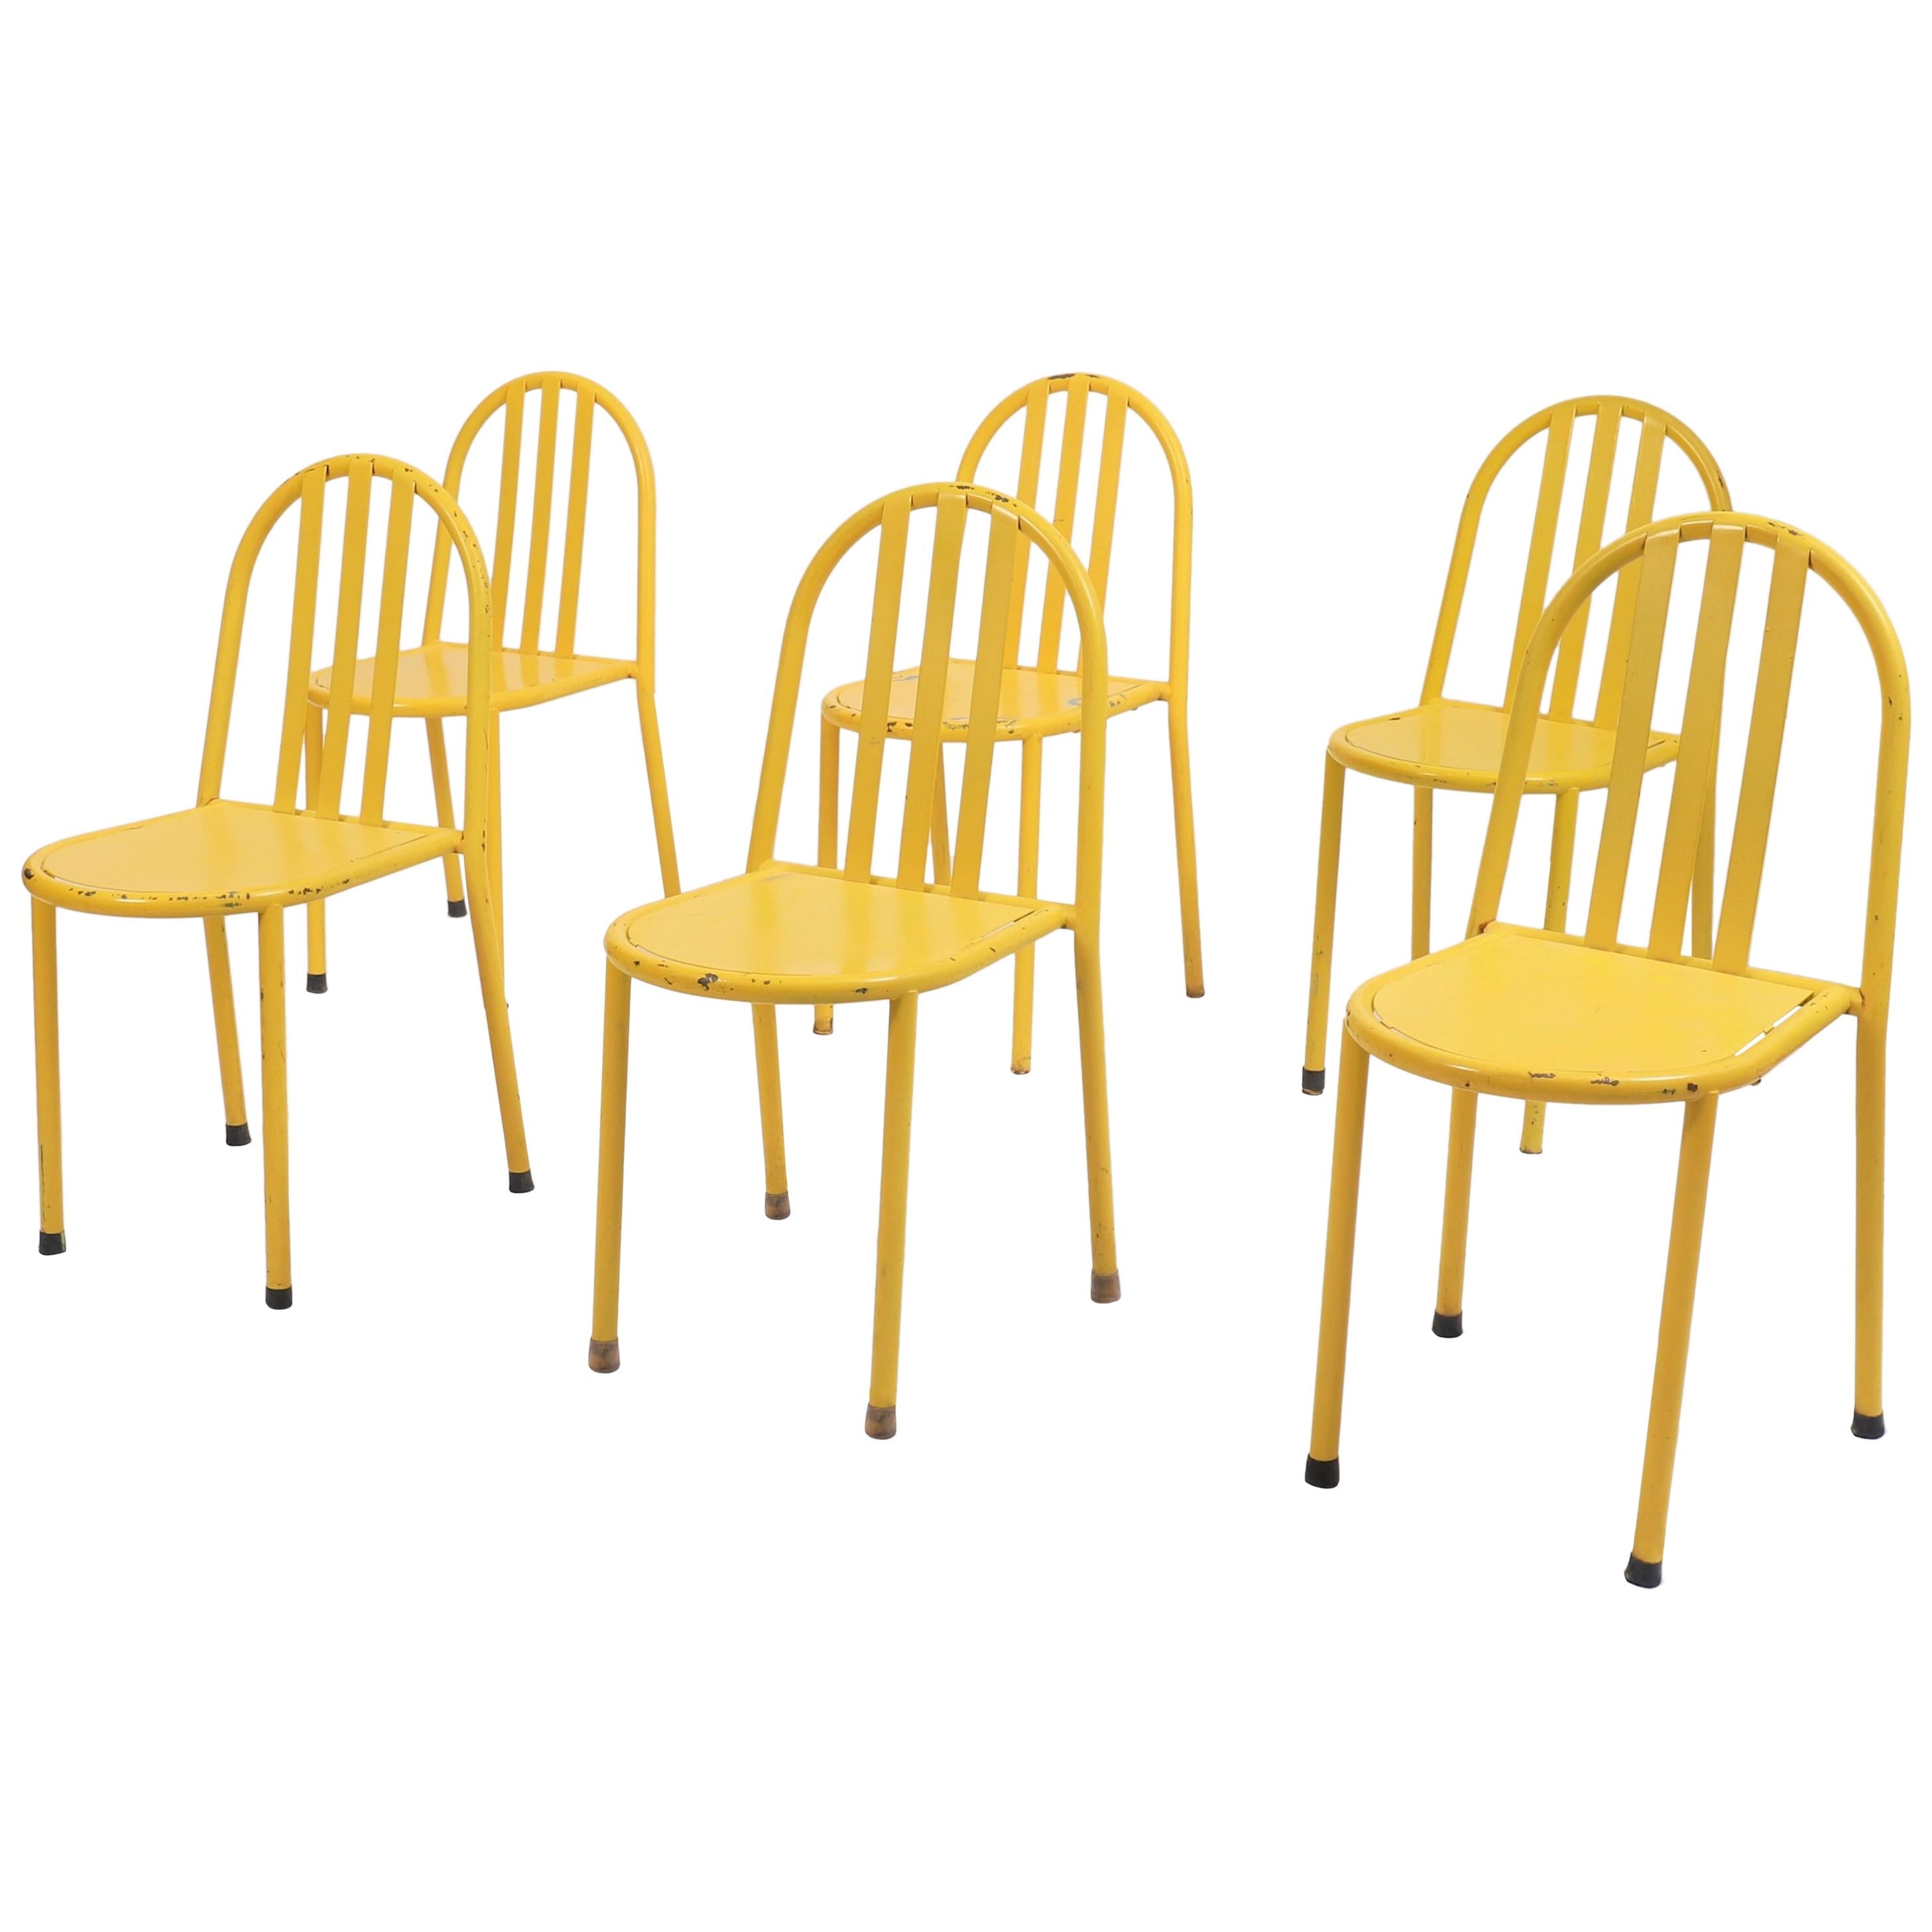 Suite of Six Modernist Tubular Chairs by Robert Mallet-Stevens